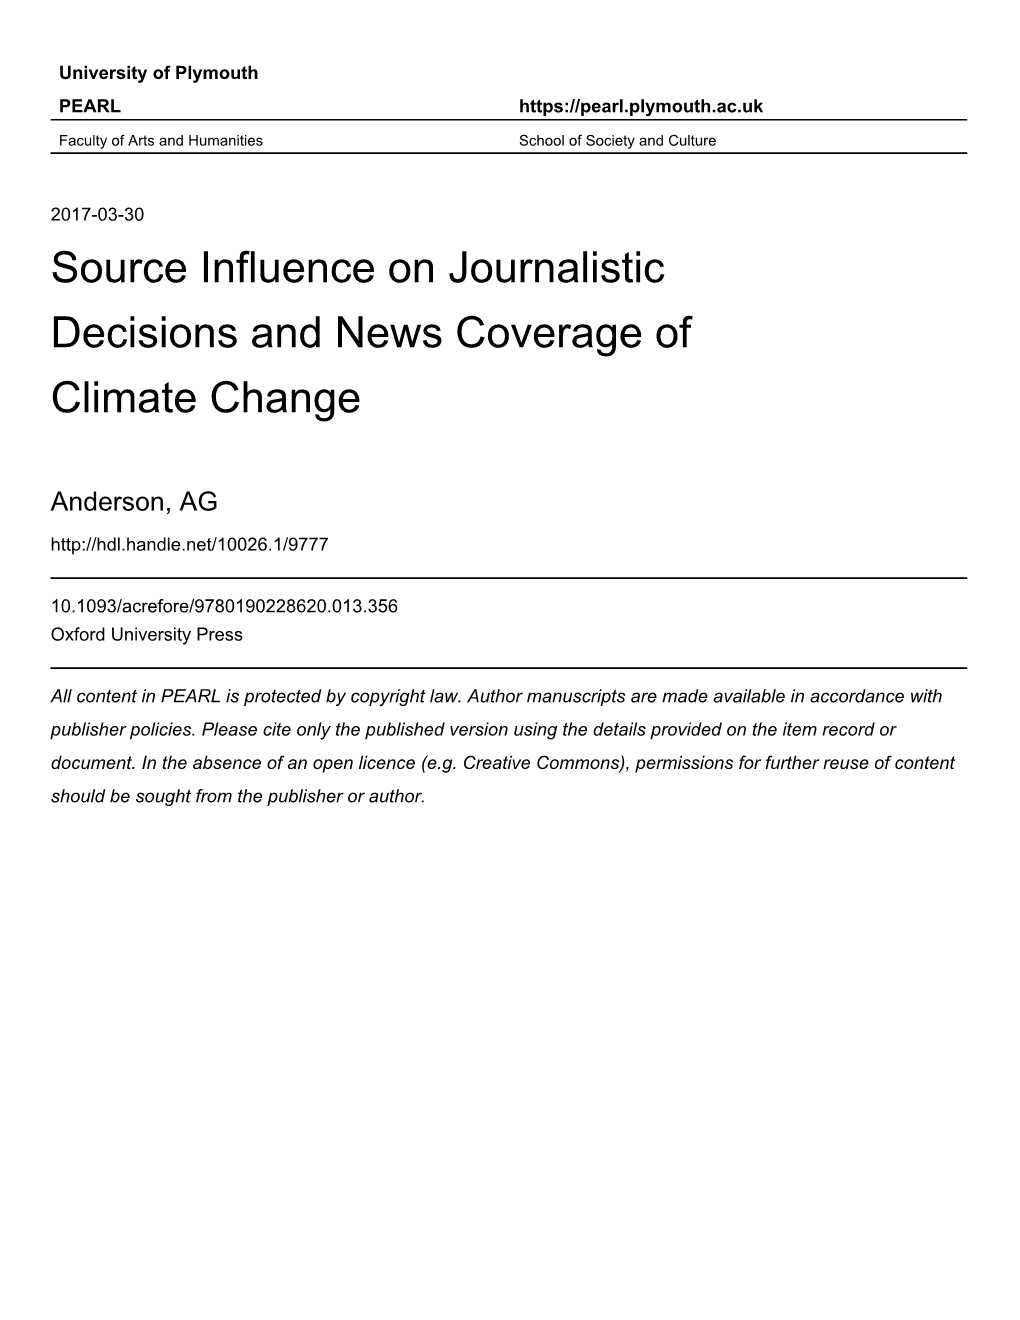 Source Influence on Journalistic Decisions and News Coverage of Climate Change